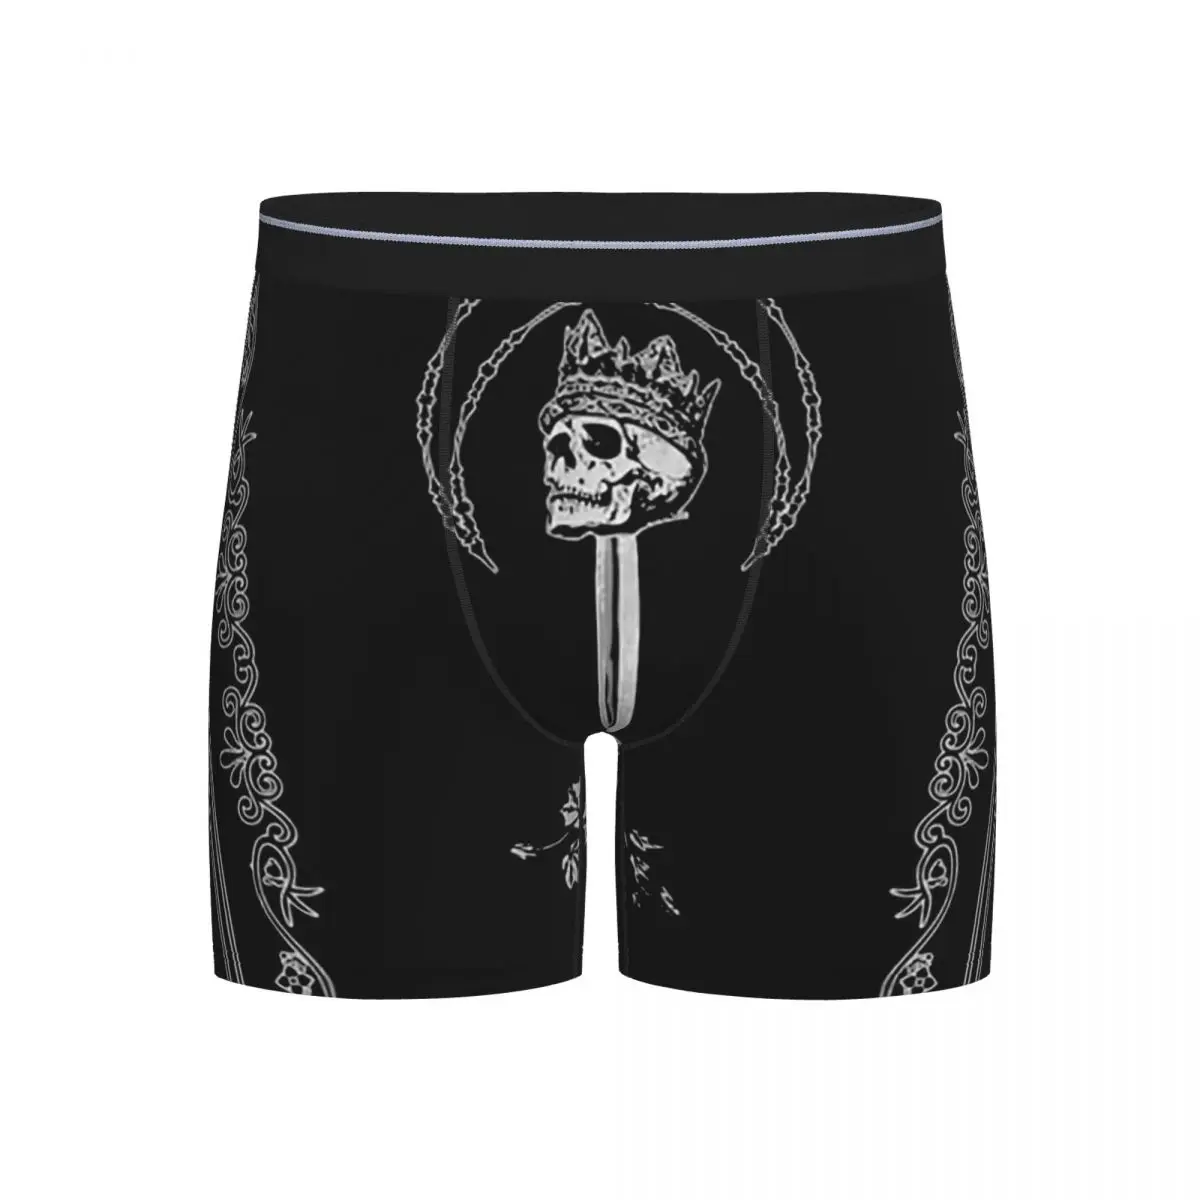 

Funny Boxer Tarot Card The War Shorts Panties Briefs Men Long Underwear The Magician Skull Magic Soft Underpants for Male S-XXL